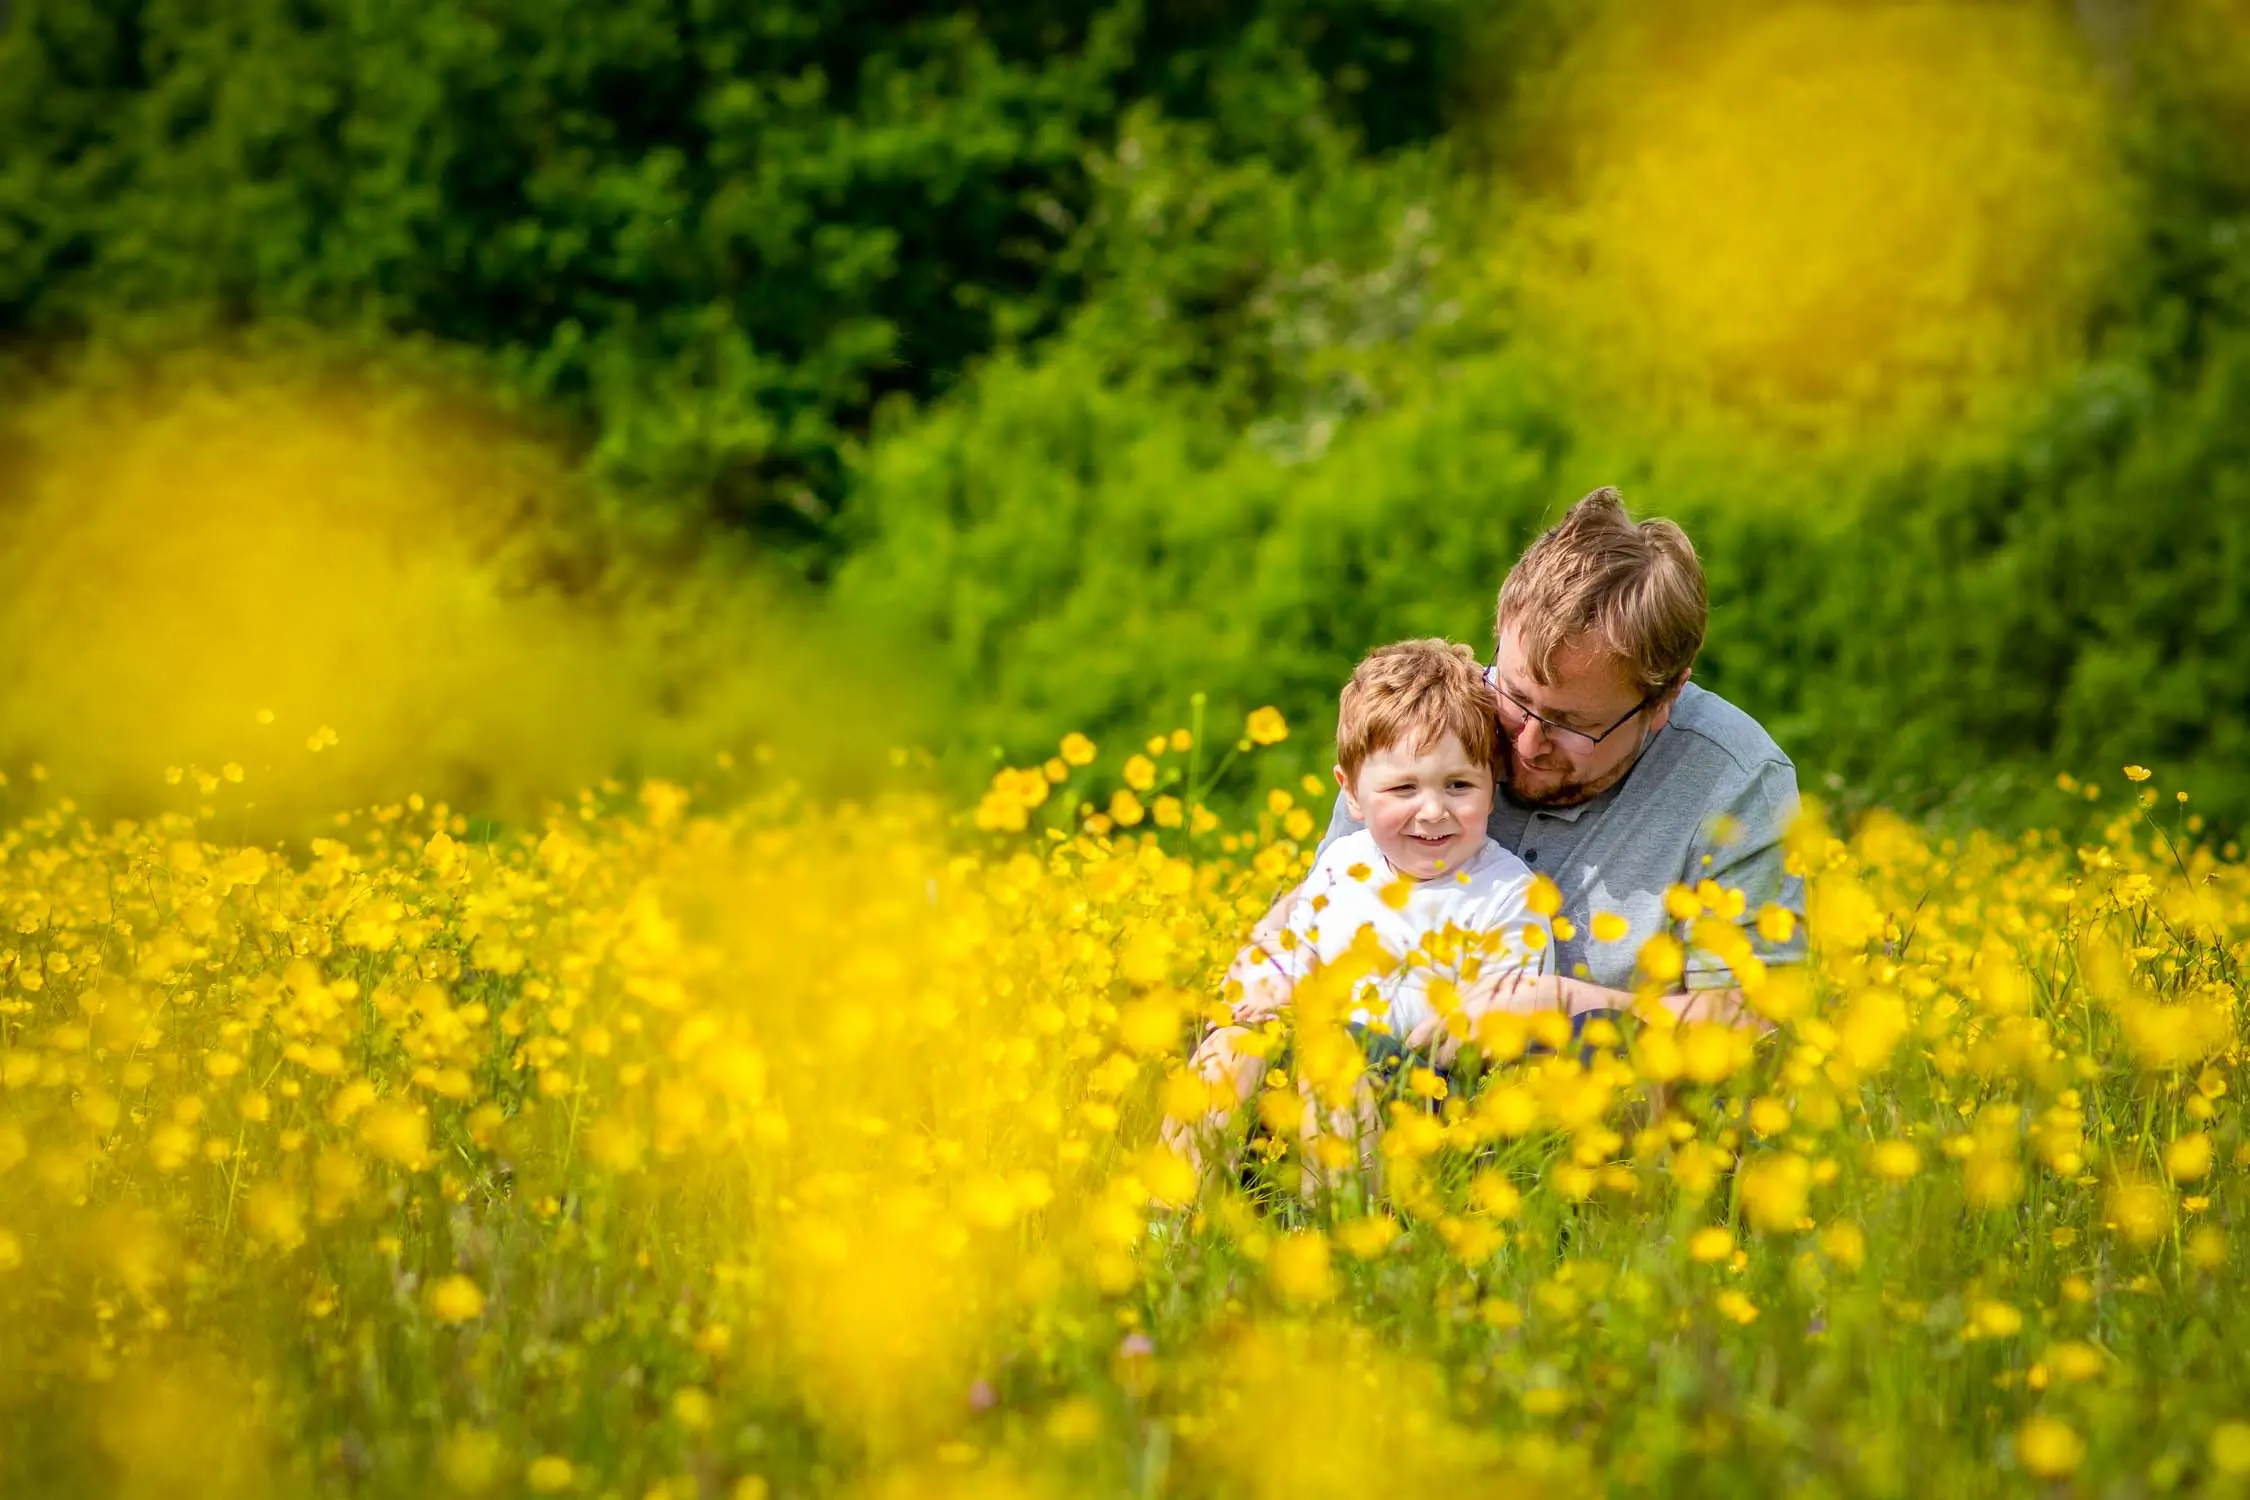 Father and son in a field full of flowers